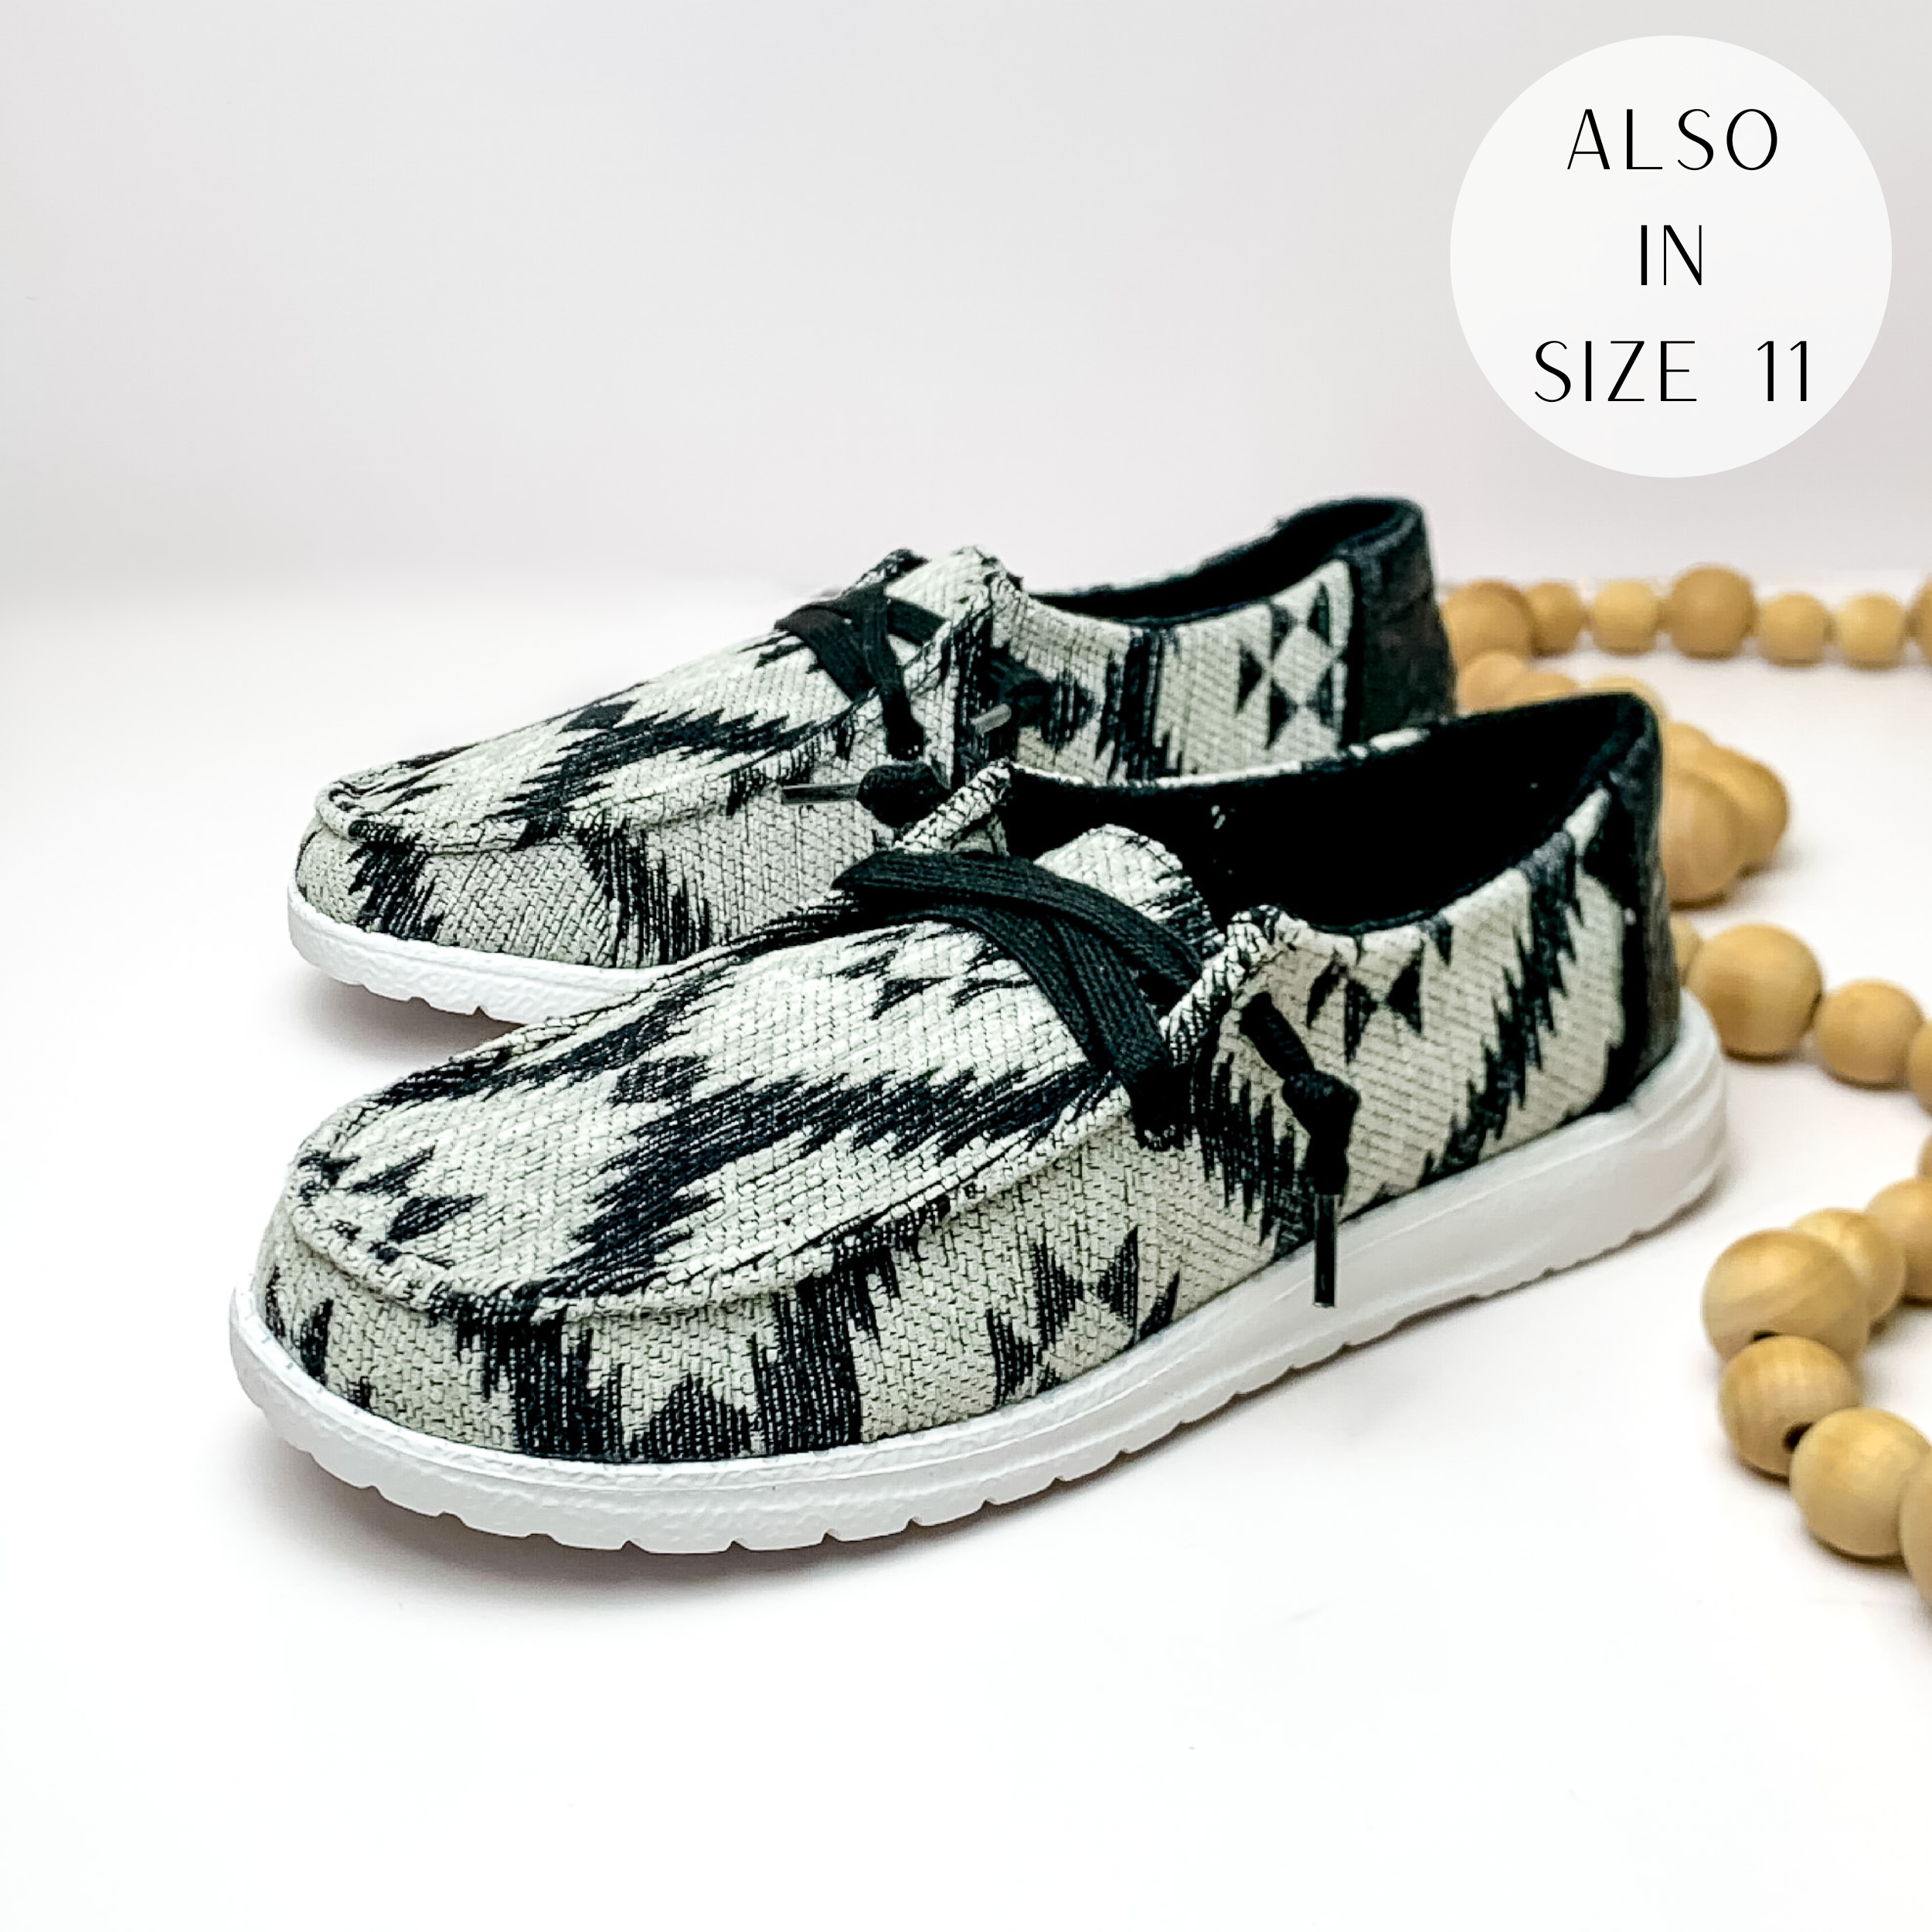 Pictured is a pair of grey canvas shoes with a black aztec print with a white sole and black laces. These shoes also include black, leather tooled heels. These shoes are pictured on a white background with tan beads on the right side.